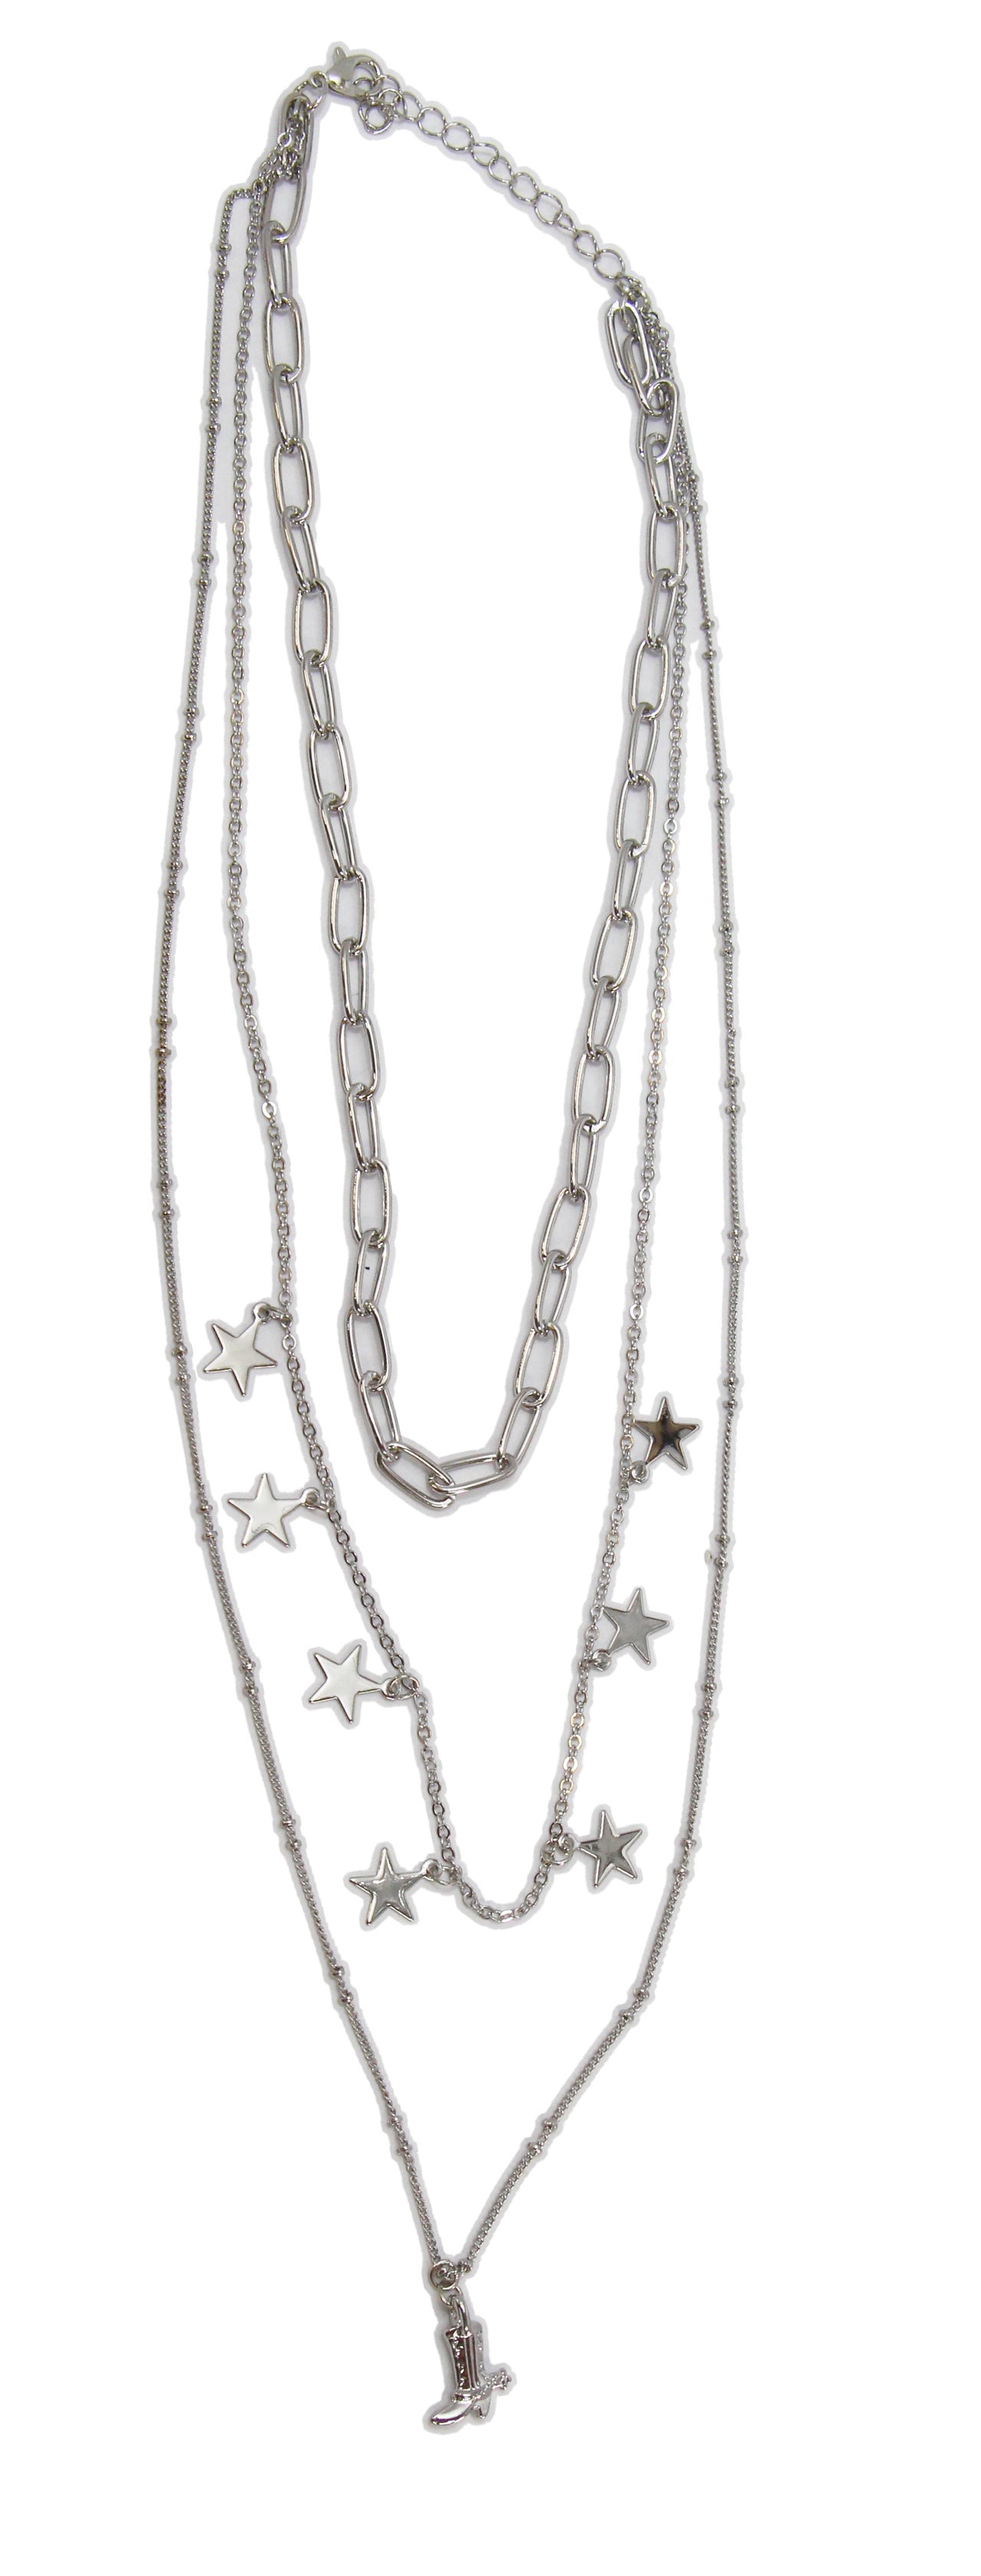 Star Struck Cowgirl Necklace